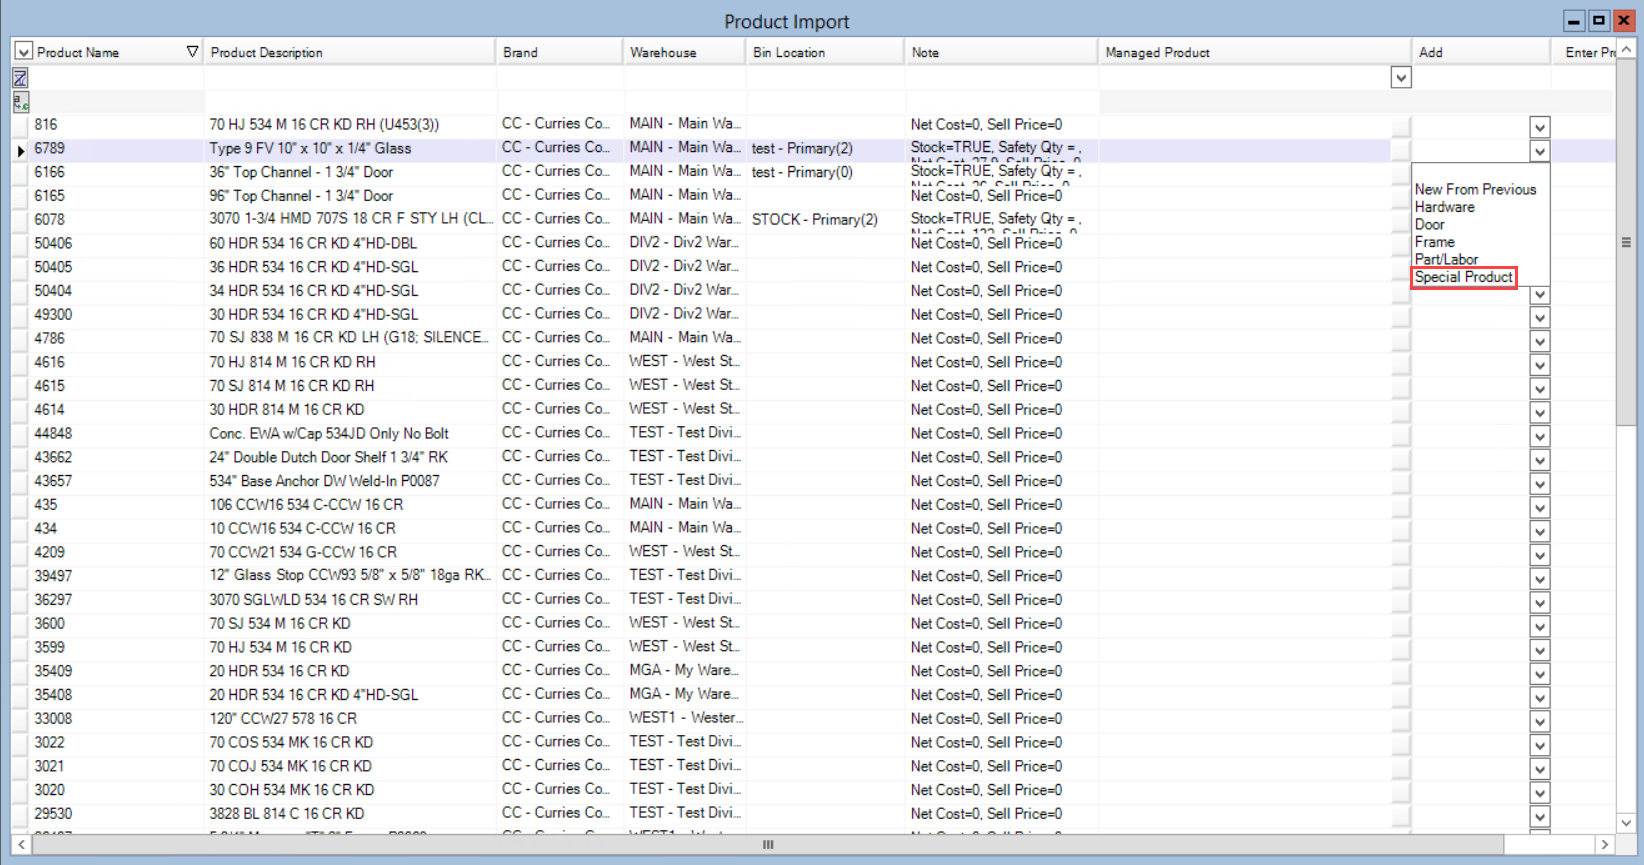 Product Import window; shows the Add column drop-down list.